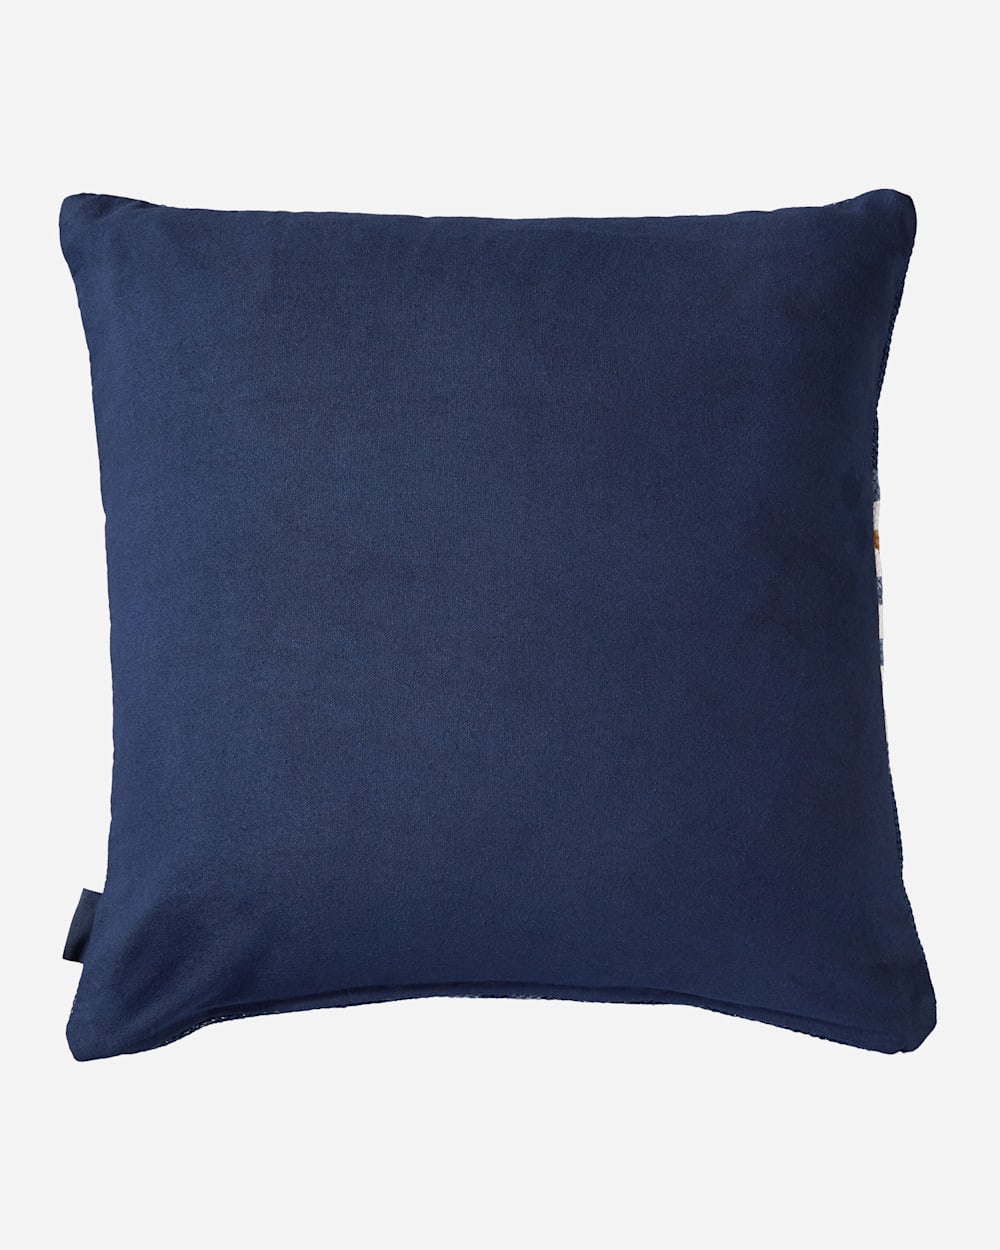 ALTERNATE VIEW OF CHIEF STAR PRINTED KILIM SQUARE PILLOW IN NAVY image number 2